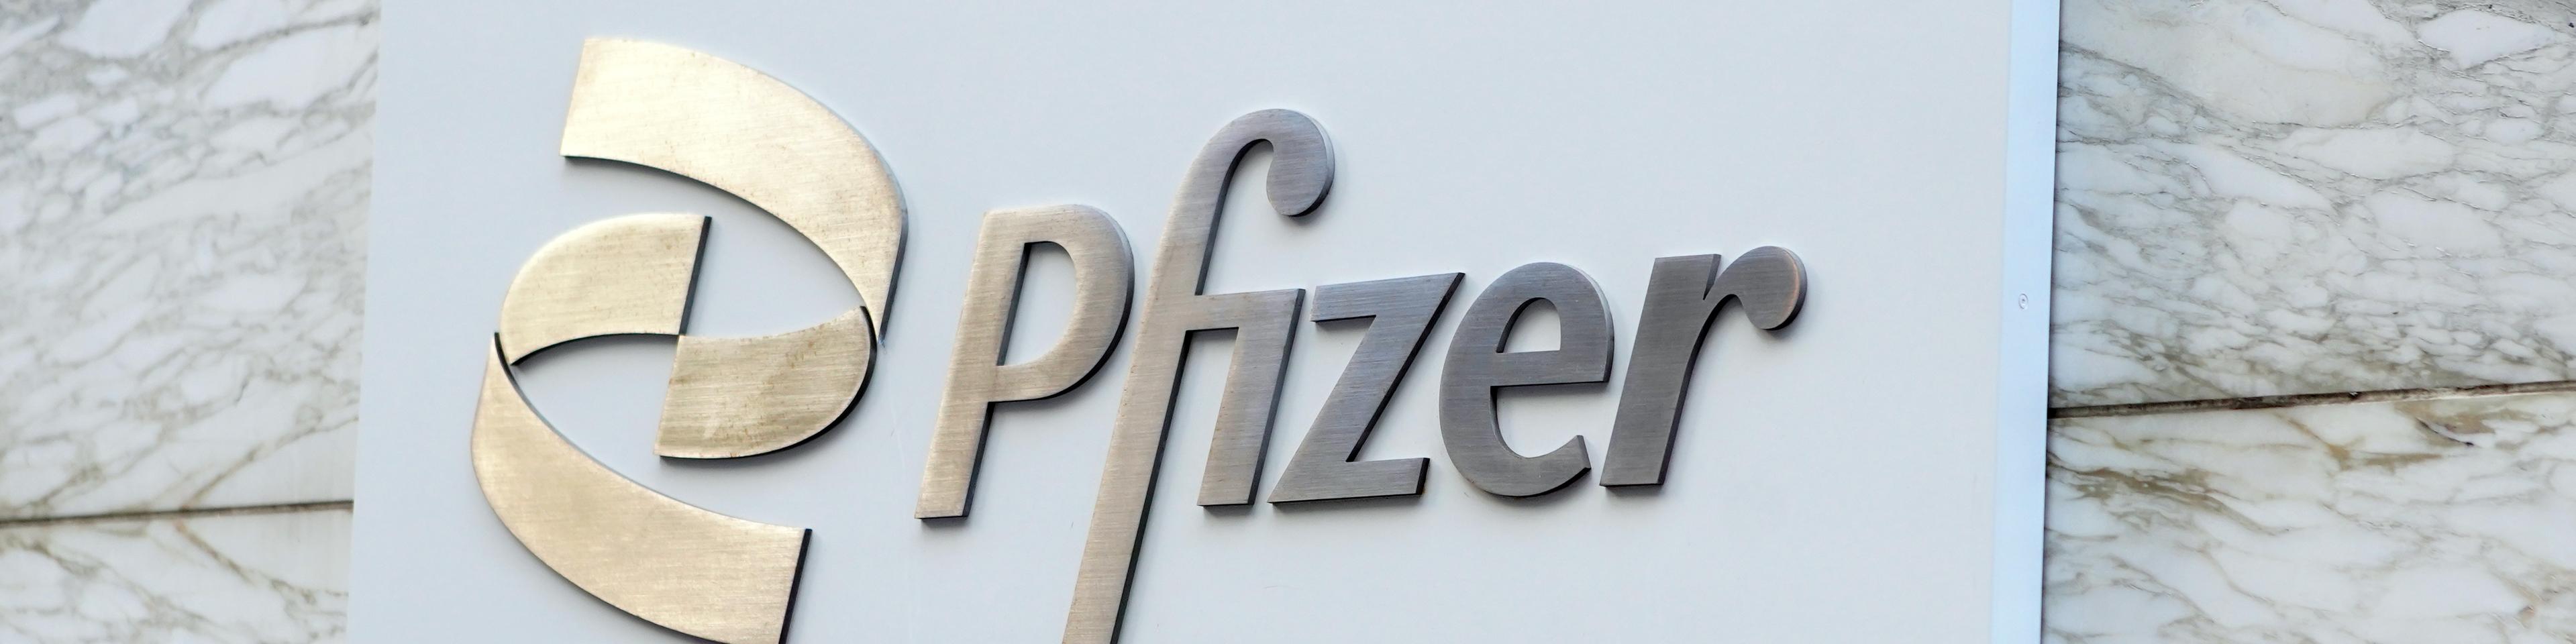 How Pfizer digitalized its work permit process to reduce work-related injuries